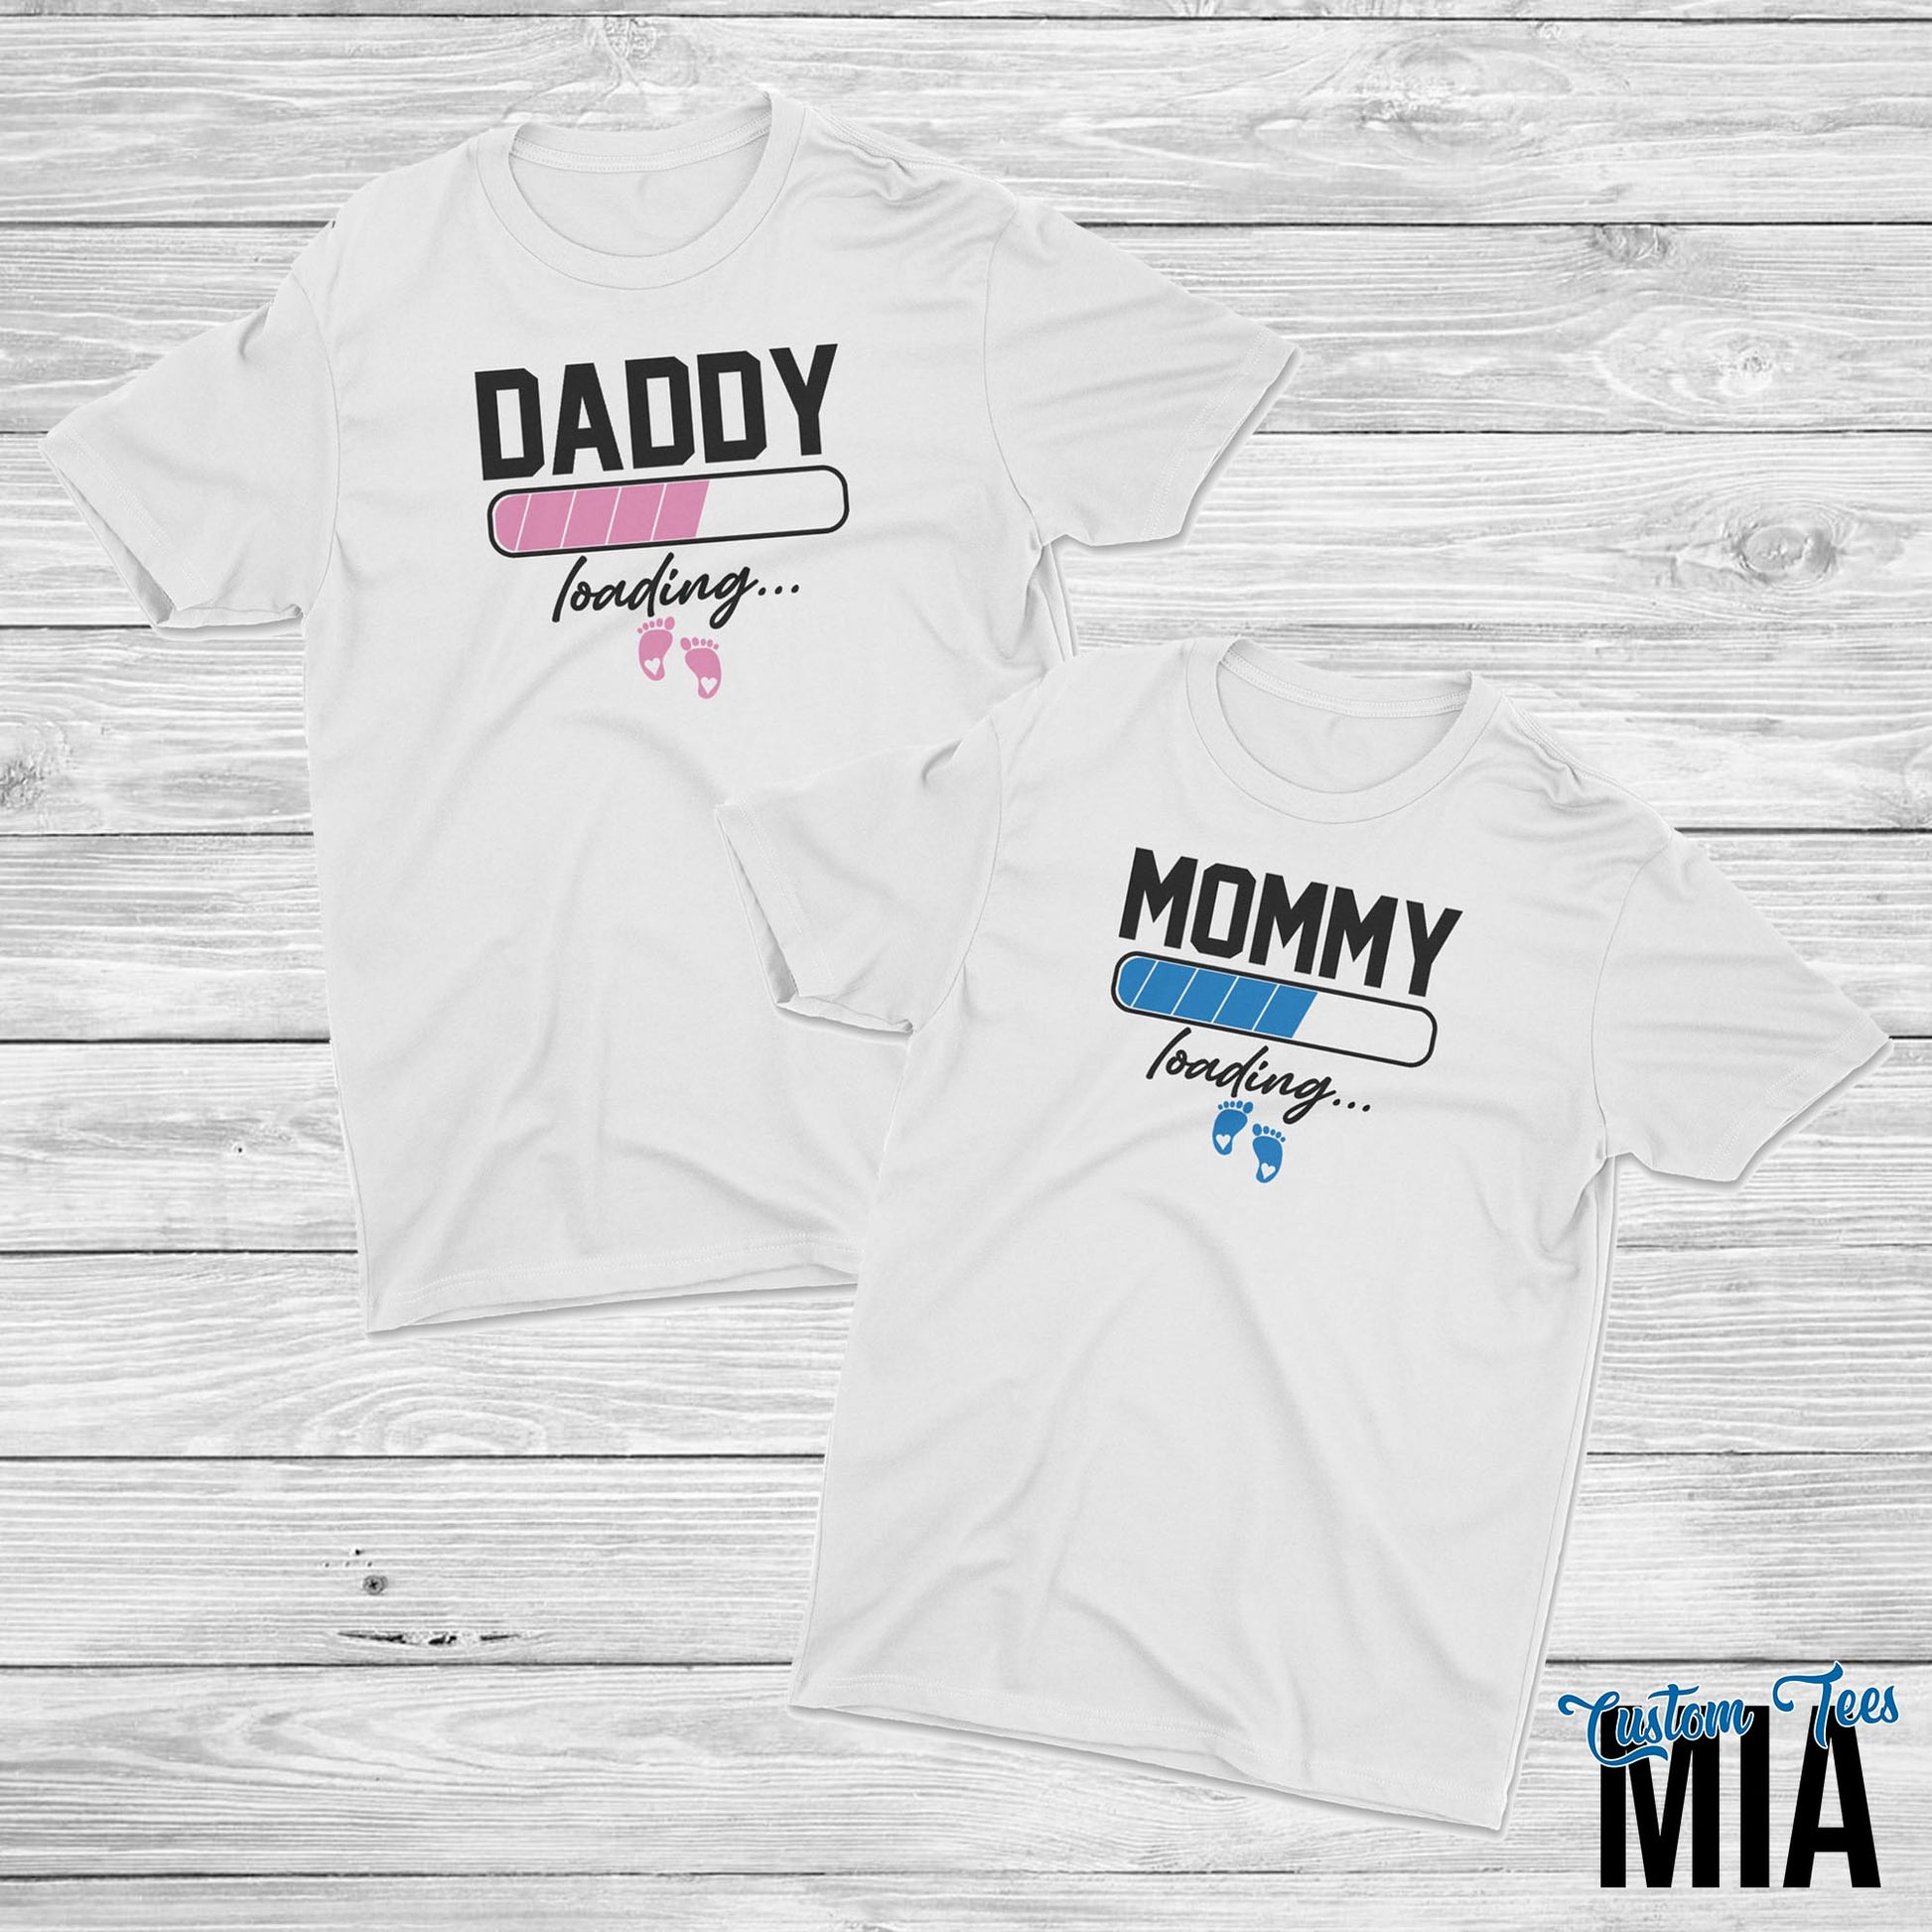 Mommy & Daddy Baby Loading Pregnancy Announcement Shirt - Custom Tees MIA